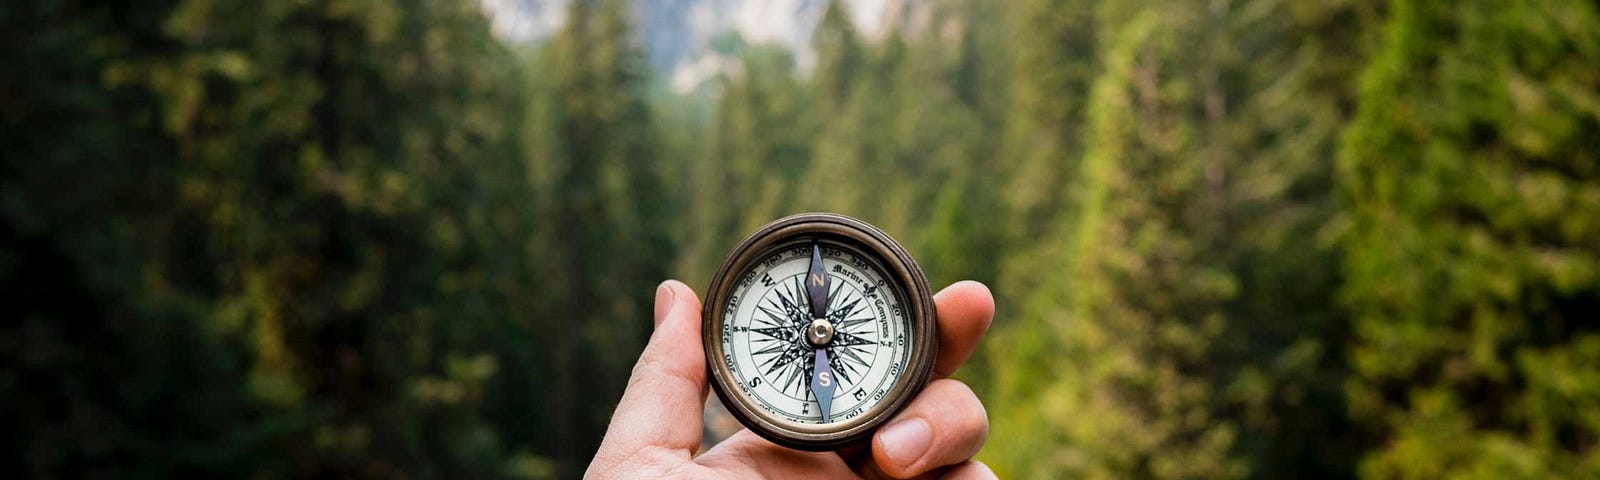 Person Holding a compass infront of trees and mountains.